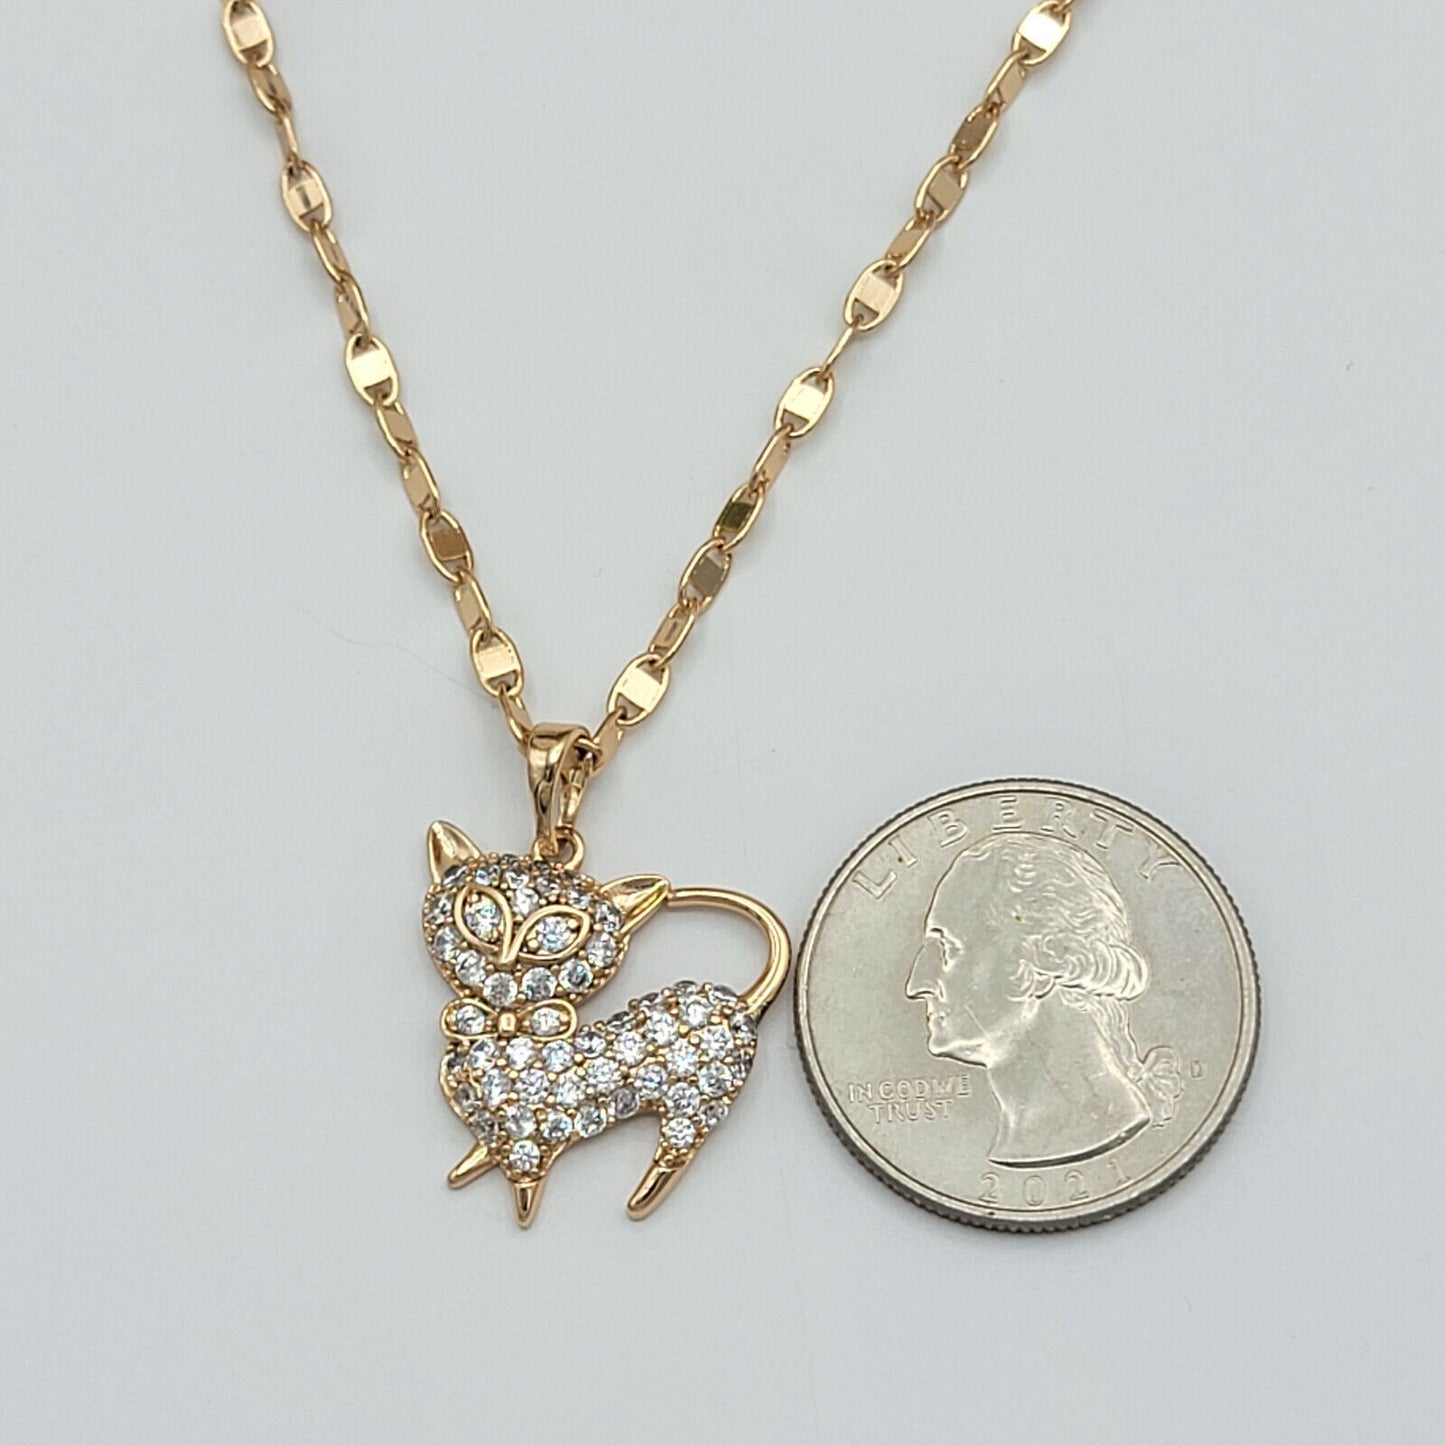 Necklaces - 18K Gold Plated. Kitty Cat Kitten CZ  Pendant & Chain. Cat Lover.